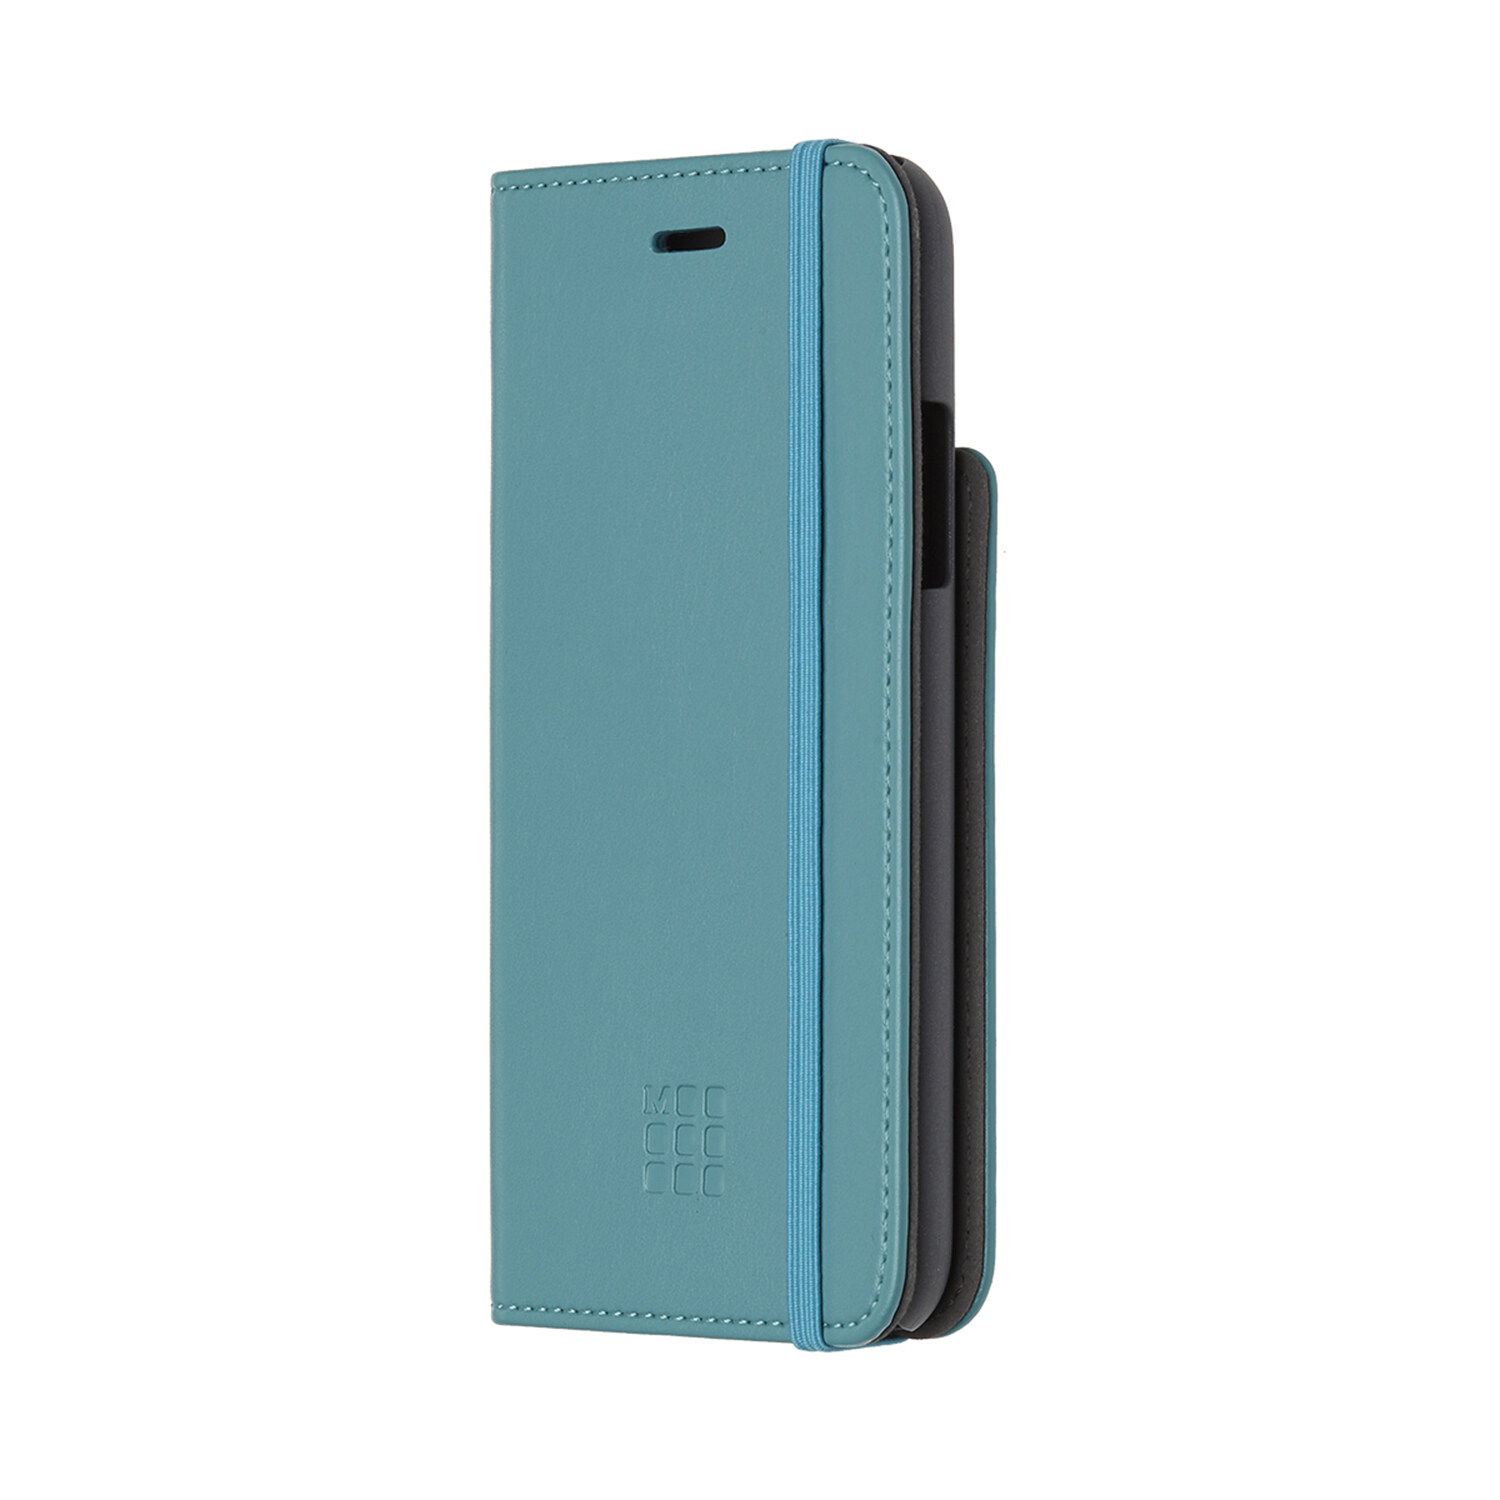 Moleskine Case Booktype, iPhone X, Reef Blue (Other)